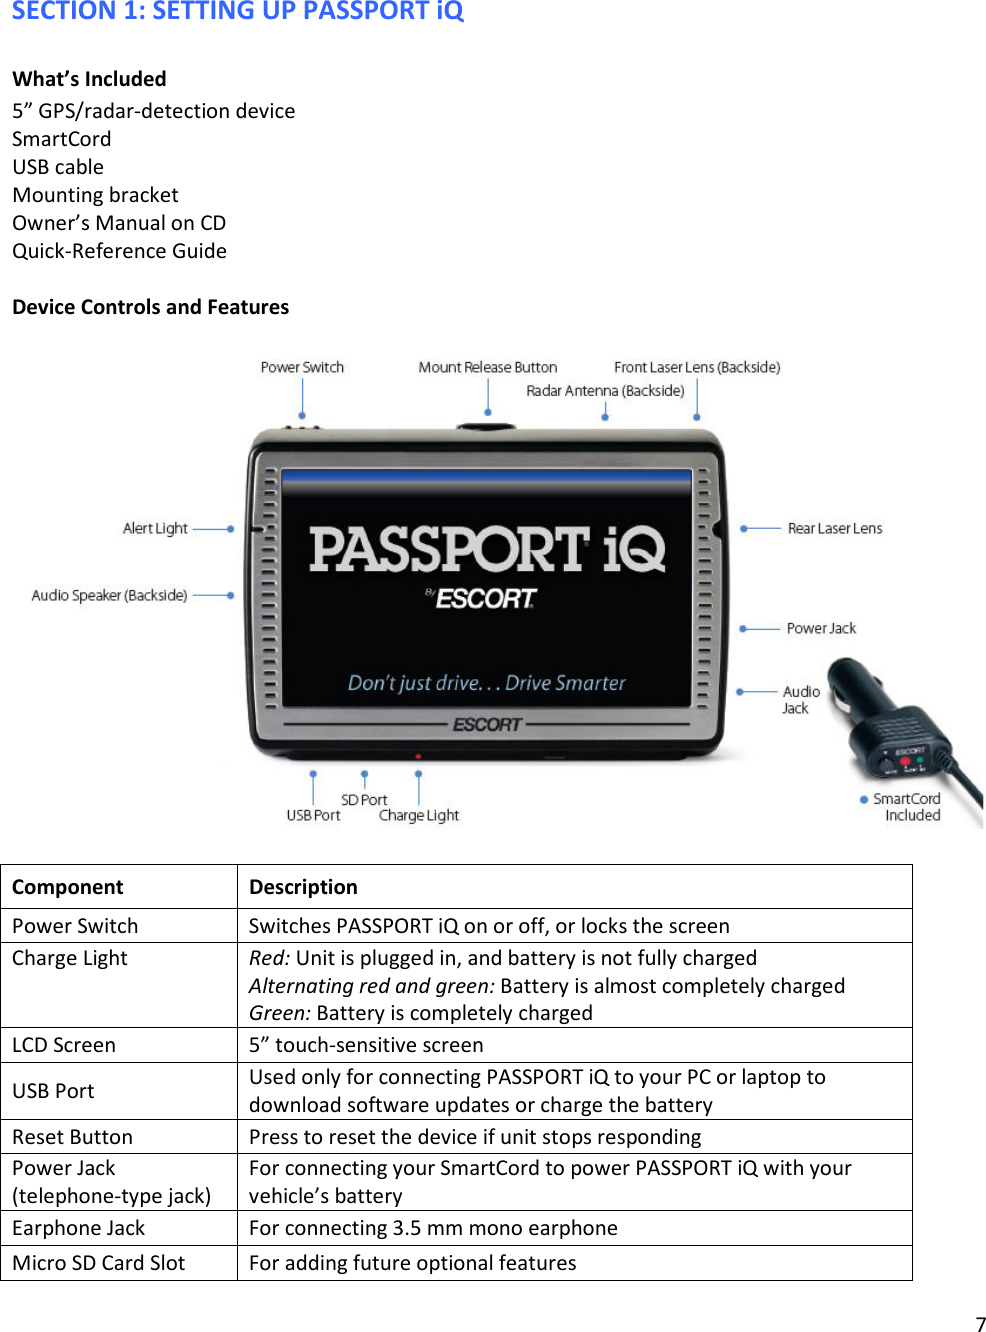 7  SECTION 1: SETTING UP PASSPORT iQ  What’s Included 5” GPS/radar-detection device  SmartCord  USB cable  Mounting bracket  Owner’s Manual on CD Quick-Reference Guide  Device Controls and Features    Component   Description  Power Switch  Switches PASSPORT iQ on or off, or locks the screen Charge Light Red: Unit is plugged in, and battery is not fully charged Alternating red and green: Battery is almost completely charged Green: Battery is completely charged LCD Screen   5” touch-sensitive screen  USB Port  Used only for connecting PASSPORT iQ to your PC or laptop to download software updates or charge the battery Reset Button   Press to reset the device if unit stops responding Power Jack (telephone-type jack) For connecting your SmartCord to power PASSPORT iQ with your vehicle’s battery Earphone Jack  For connecting 3.5 mm mono earphone Micro SD Card Slot  For adding future optional features 